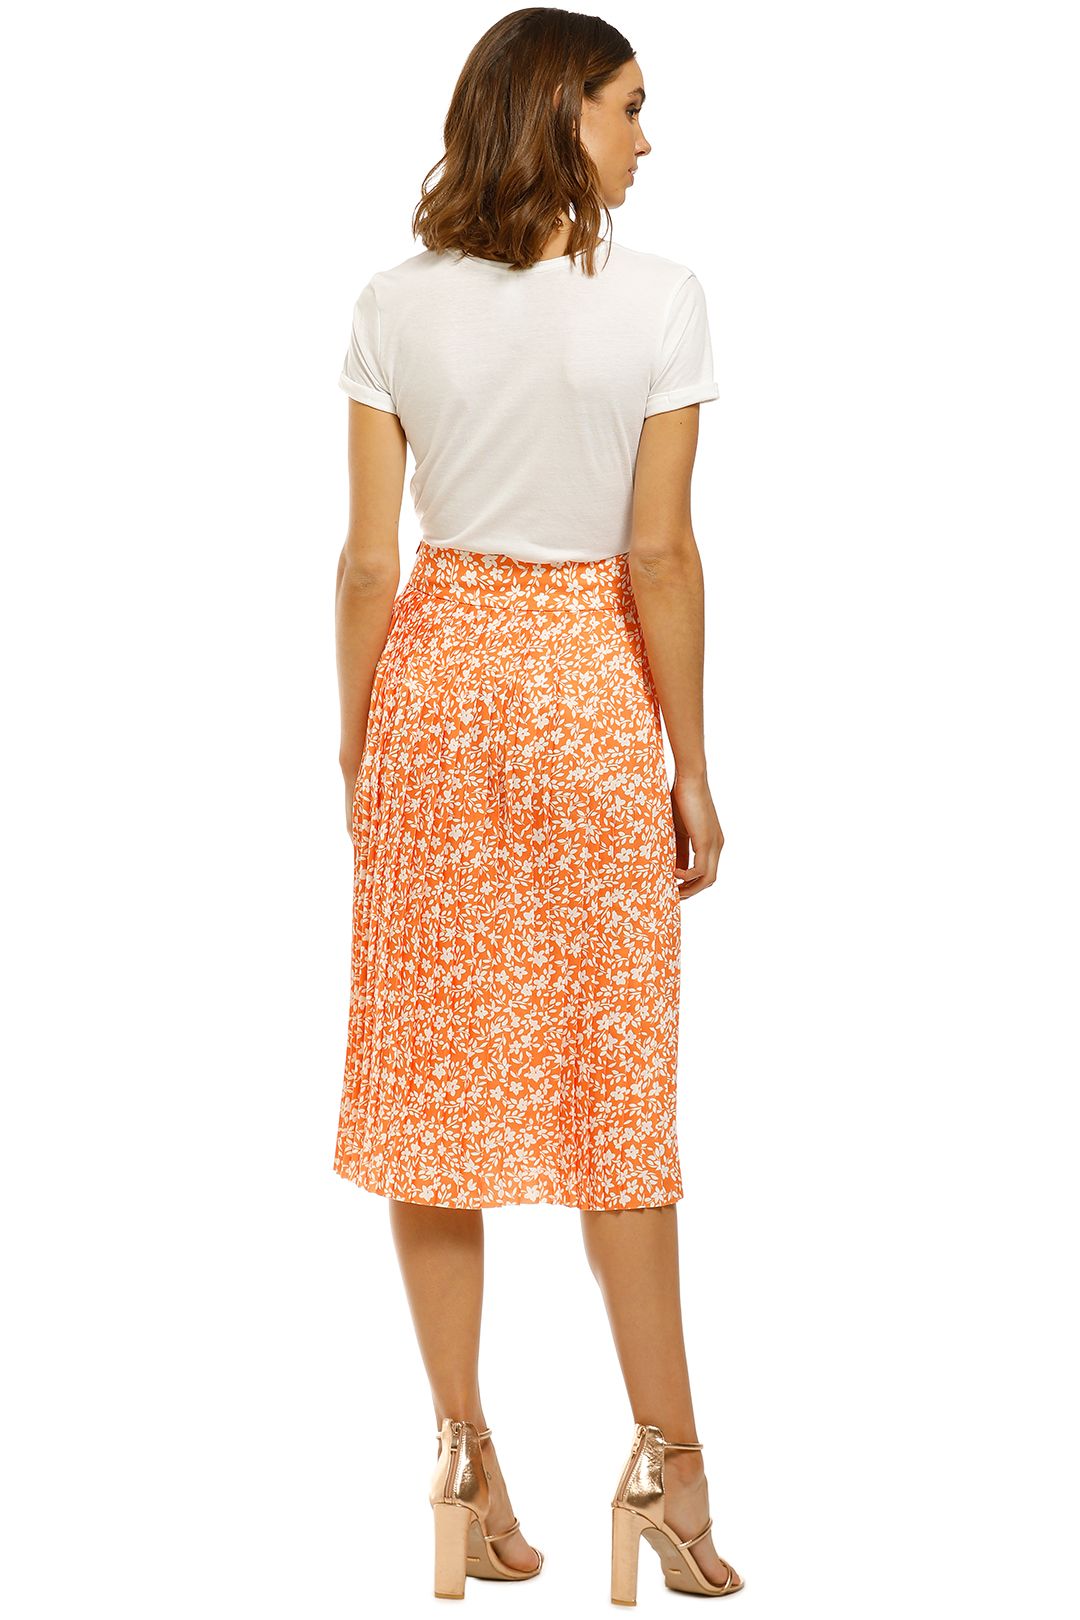 Floral Pleated Midi Skirt in Orange by By Johnny for Hire | GlamCorner